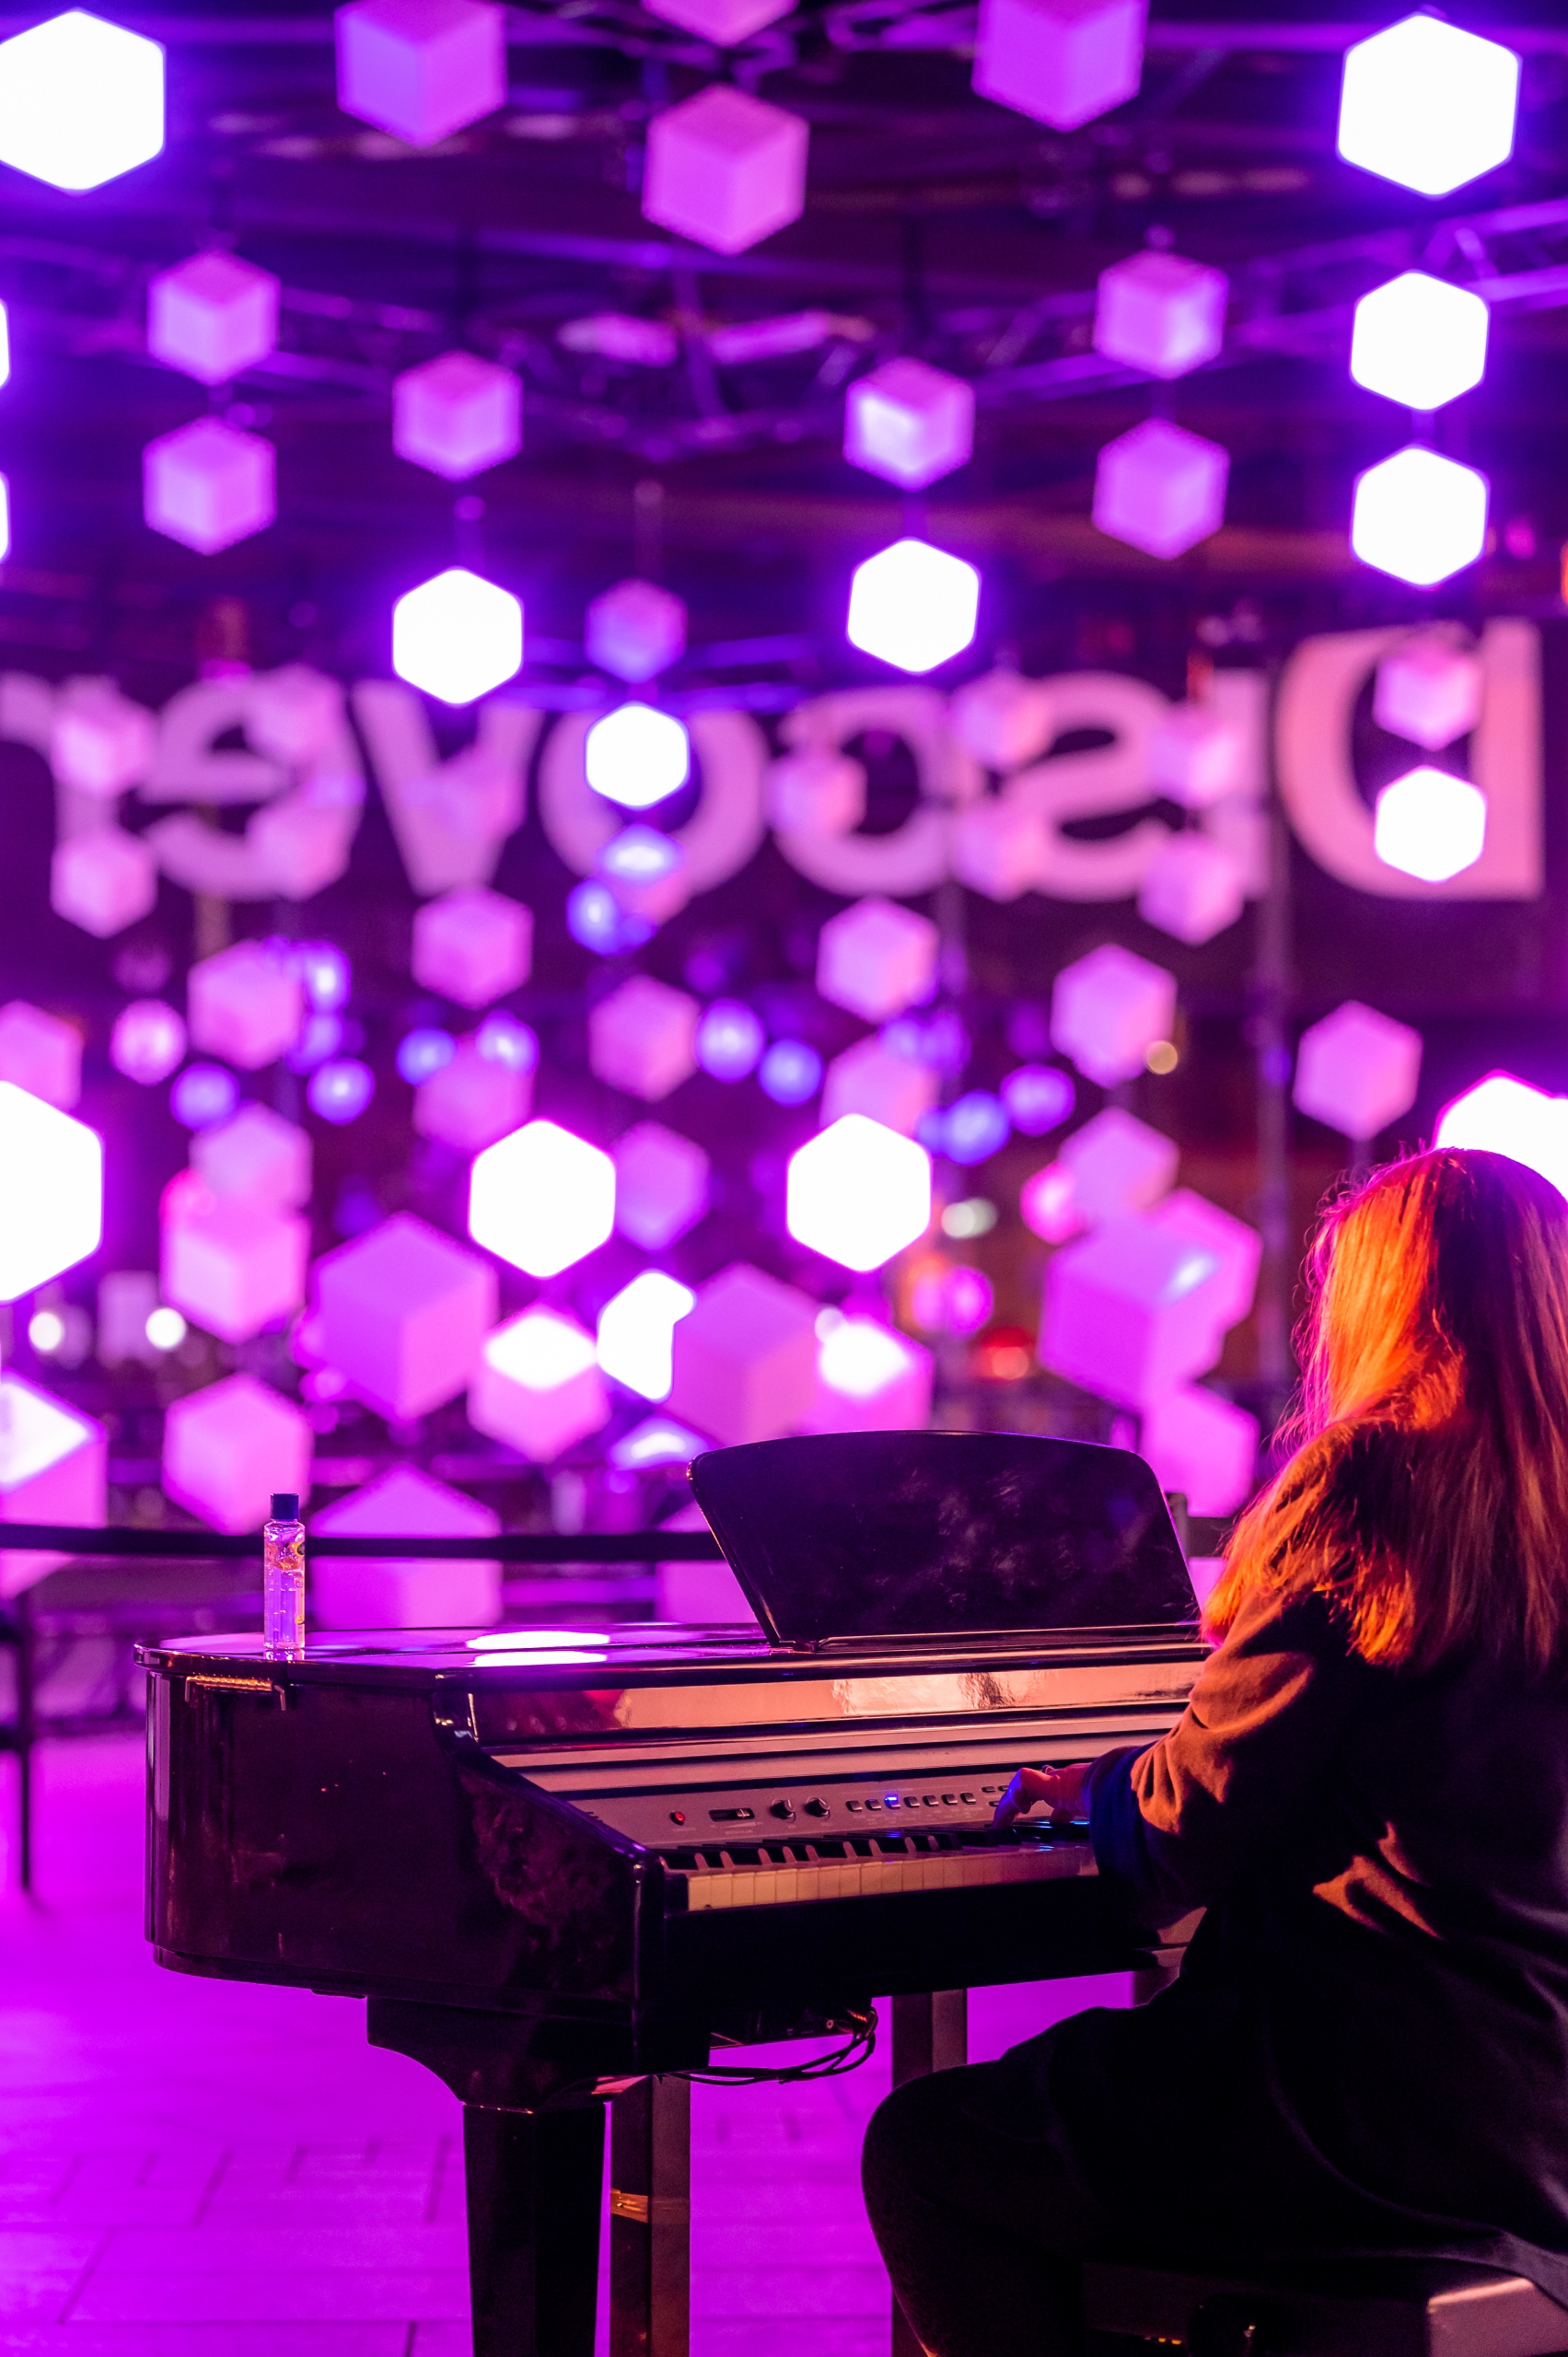 pianist at piano with purple shaped blocks suspended in front of them